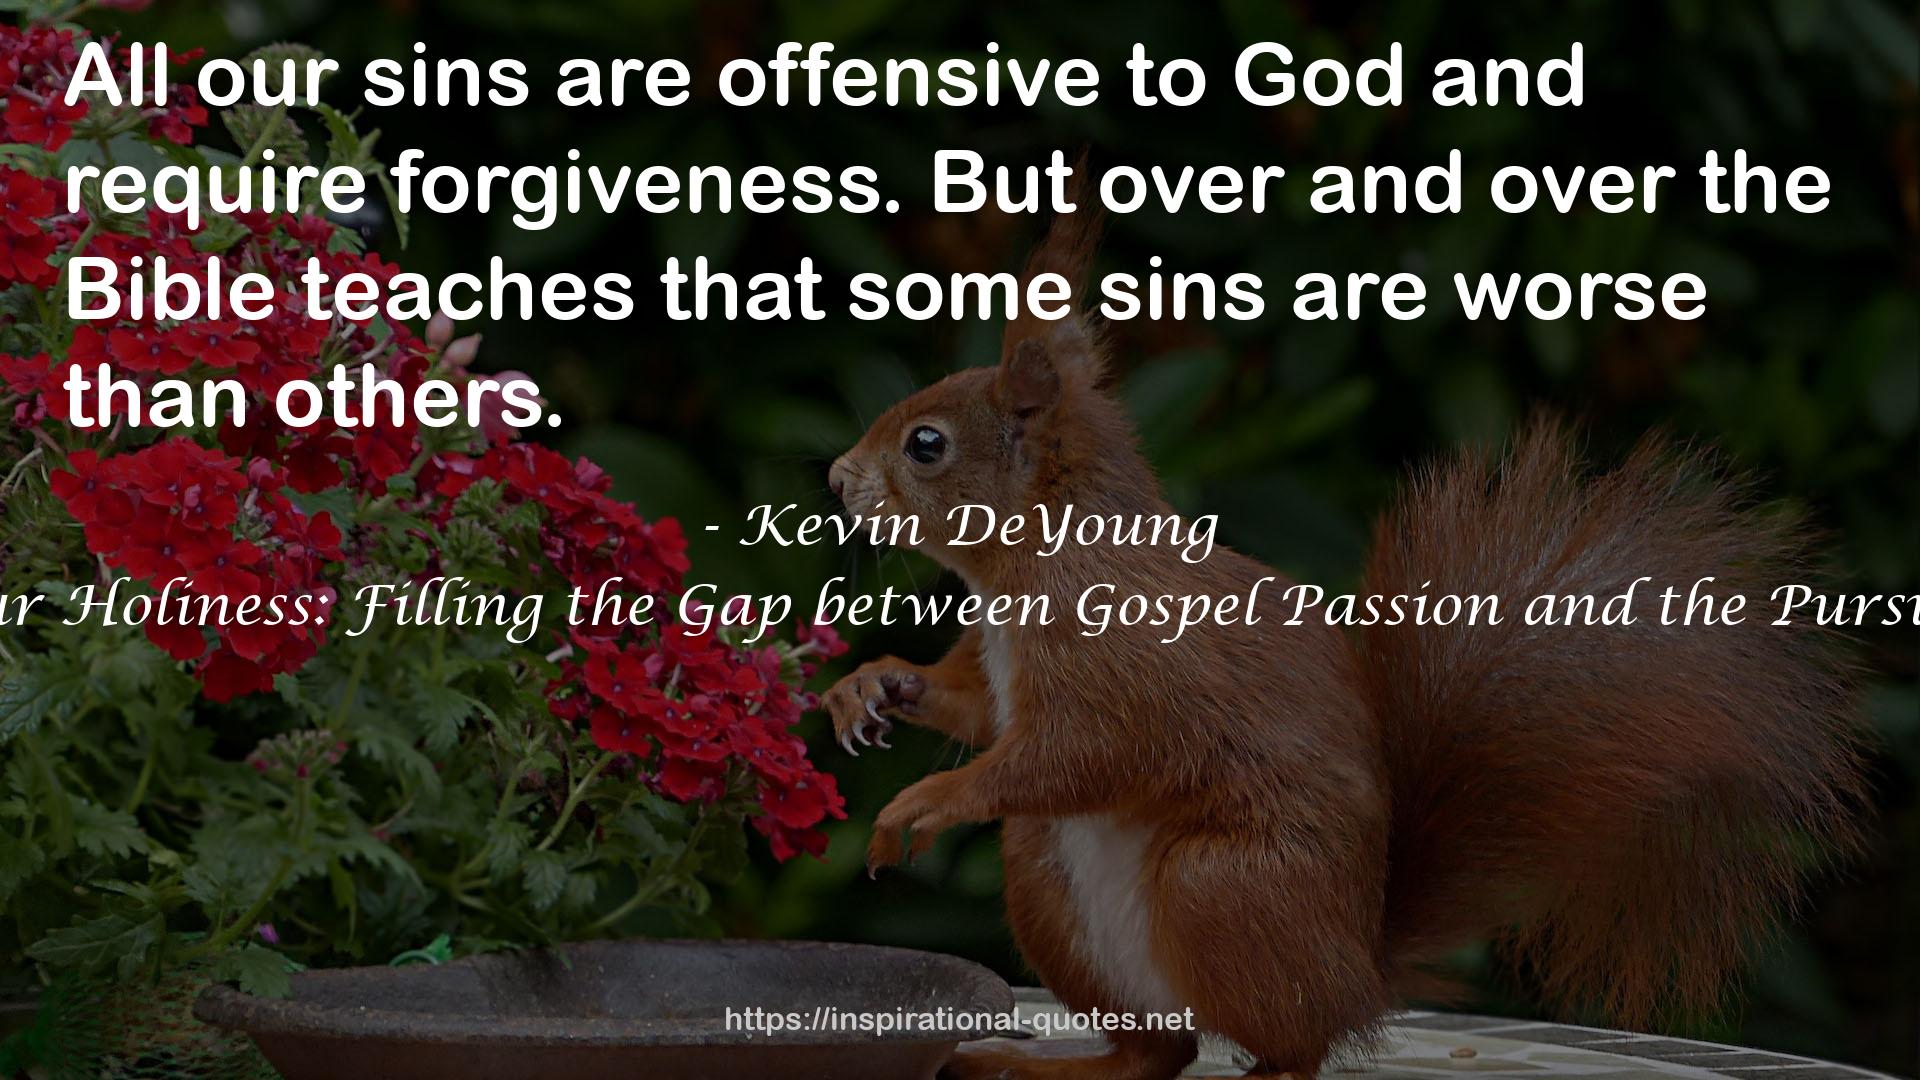 Kevin DeYoung QUOTES